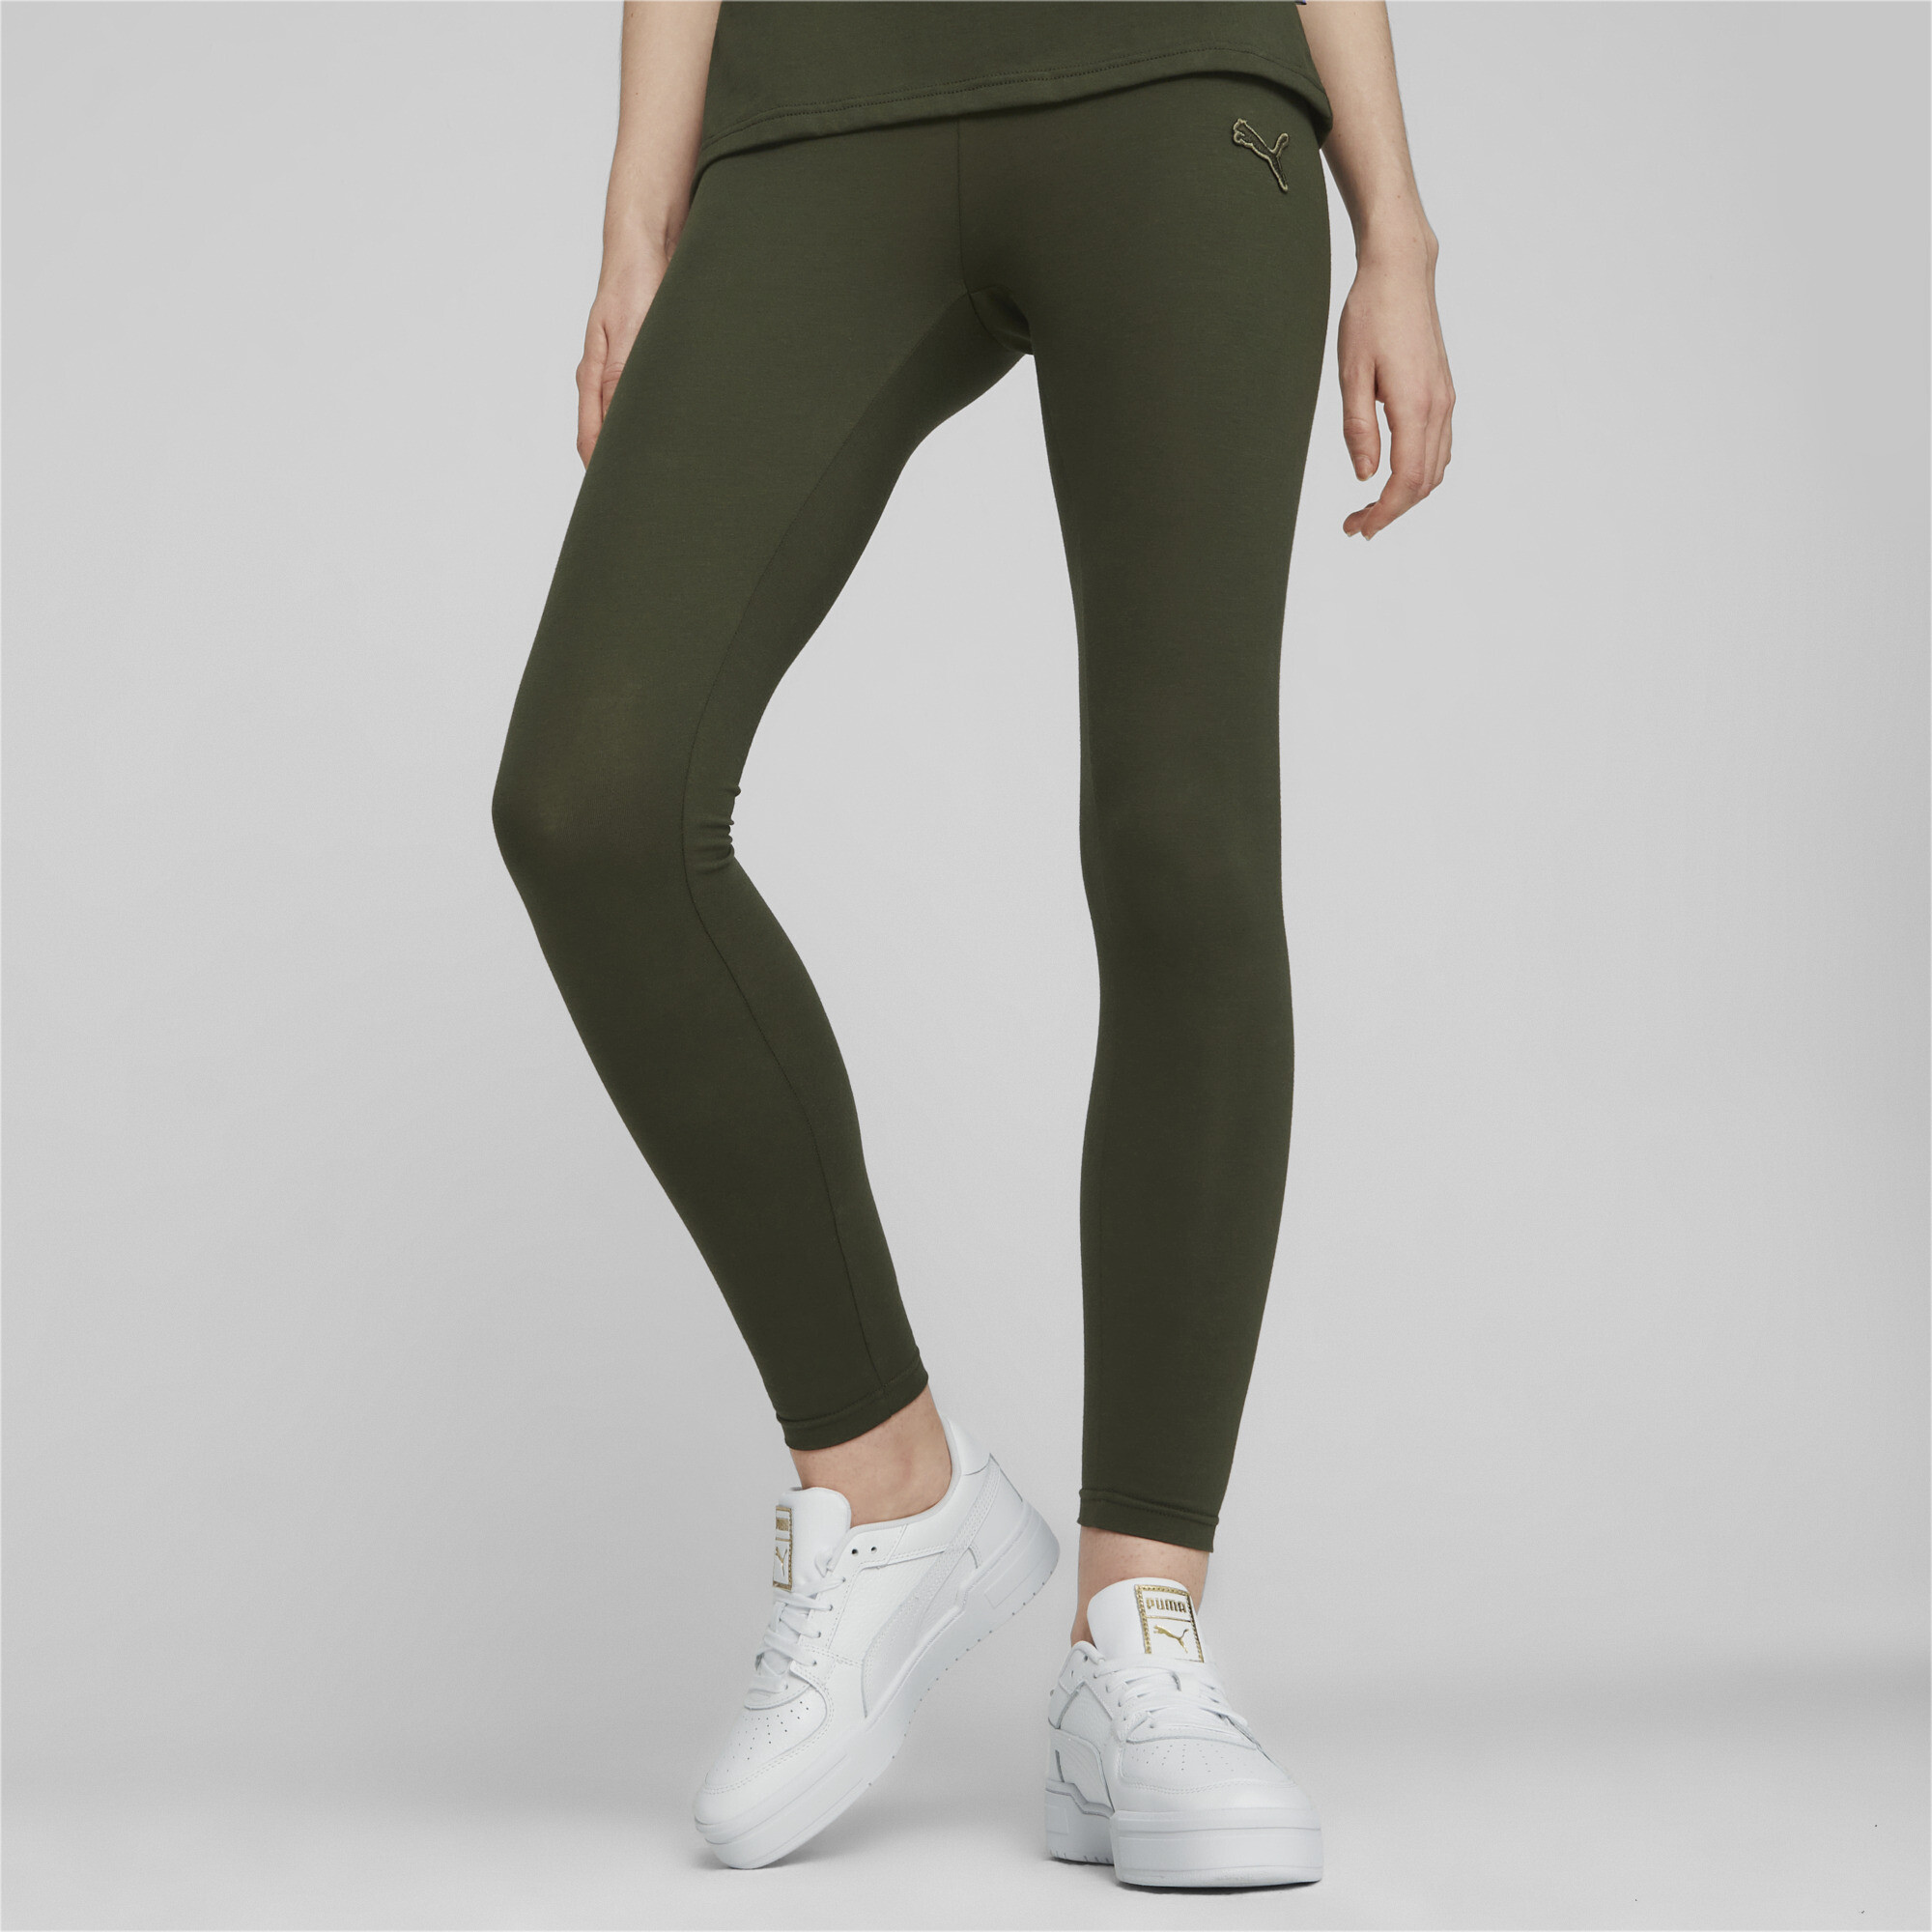 Women's Puma Made In France Leggings, Green, Size S, Clothing